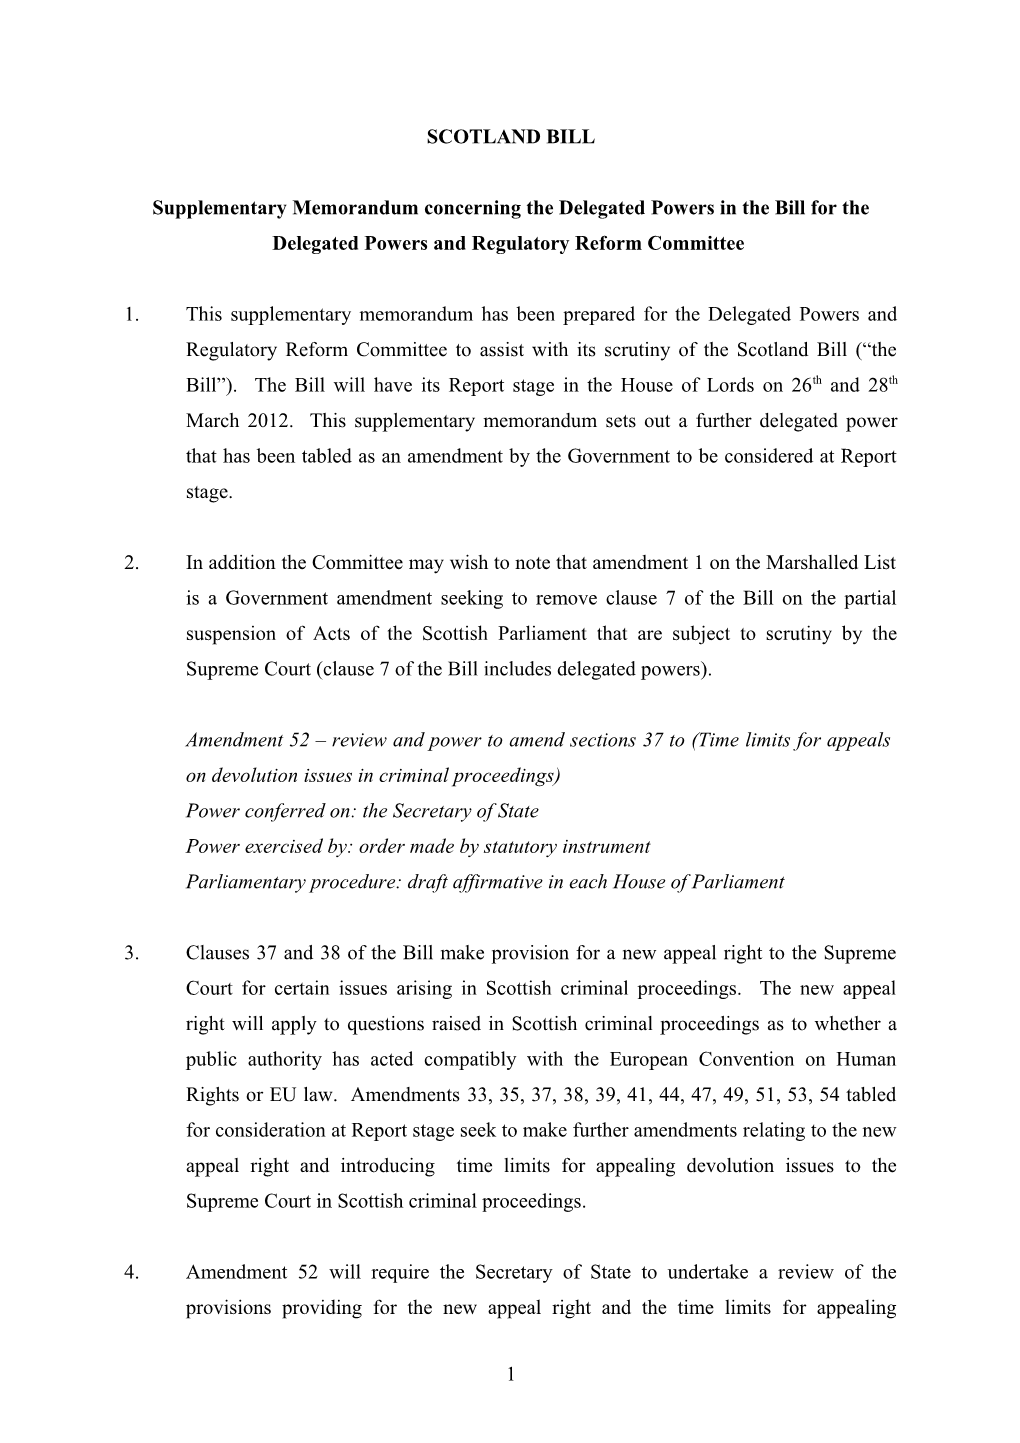 Supplementary Memorandum Concerning the Delegated Powers in the Bill for the Delegated